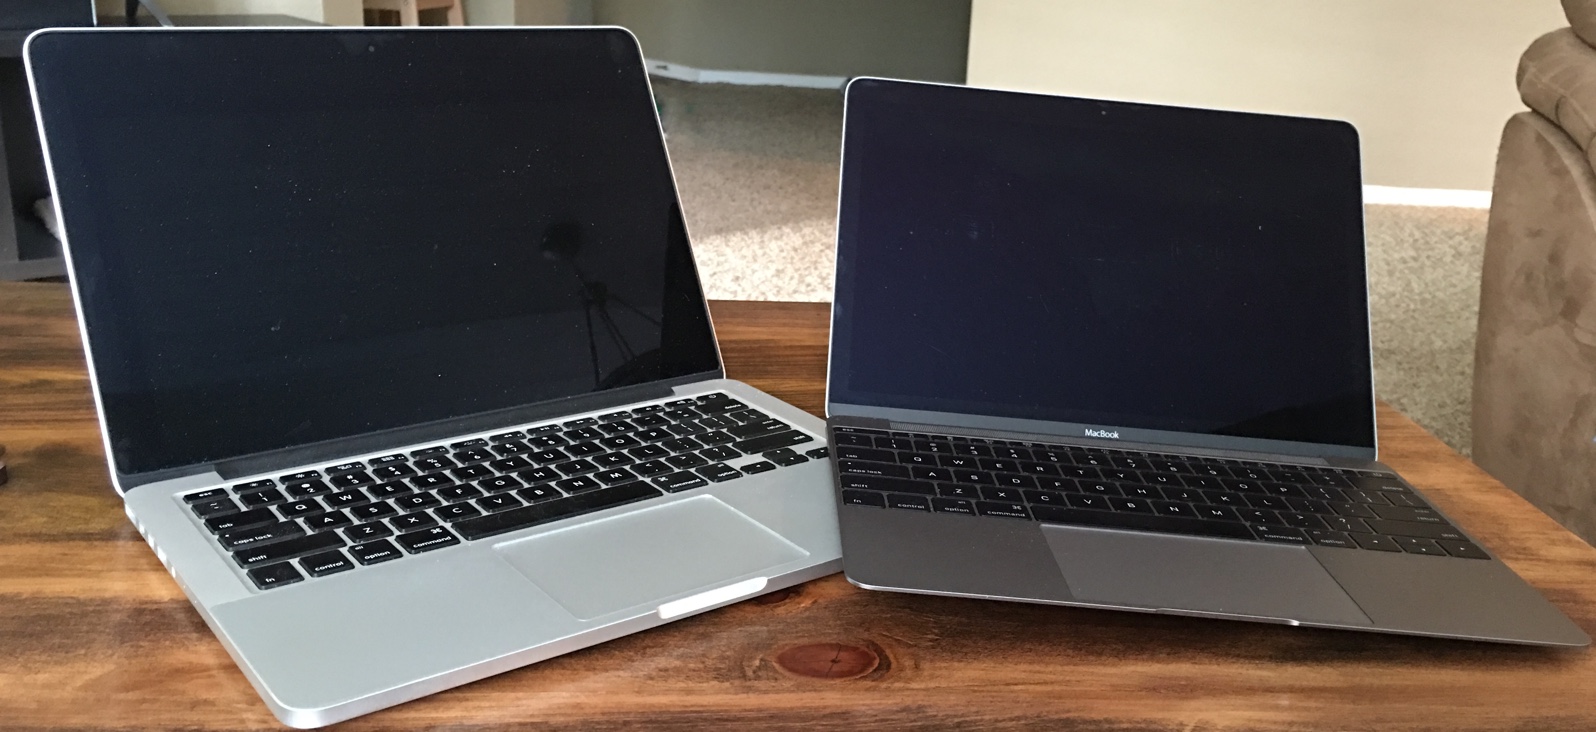 PC/タブレット ノートPC 2016 MacBook review: It's almost the Pro we're dreaming of